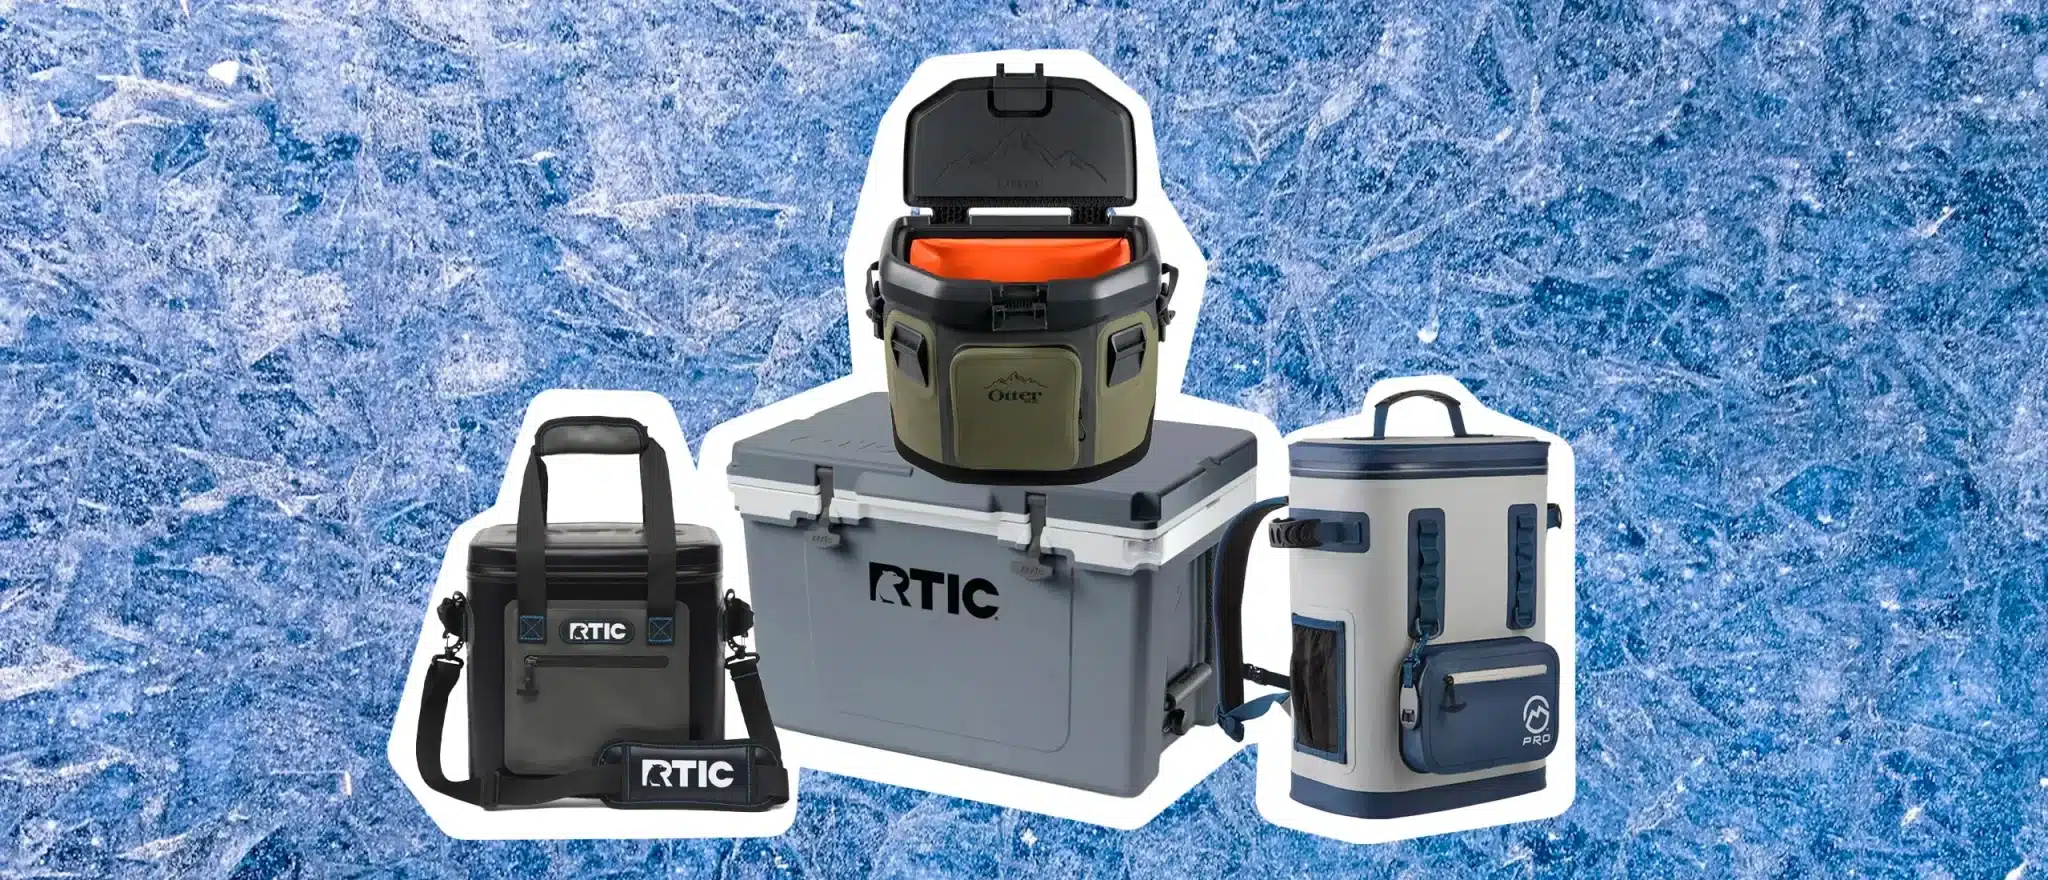 Don’t Want to Drop Cash on a YETI? These Coolers Are Even Better